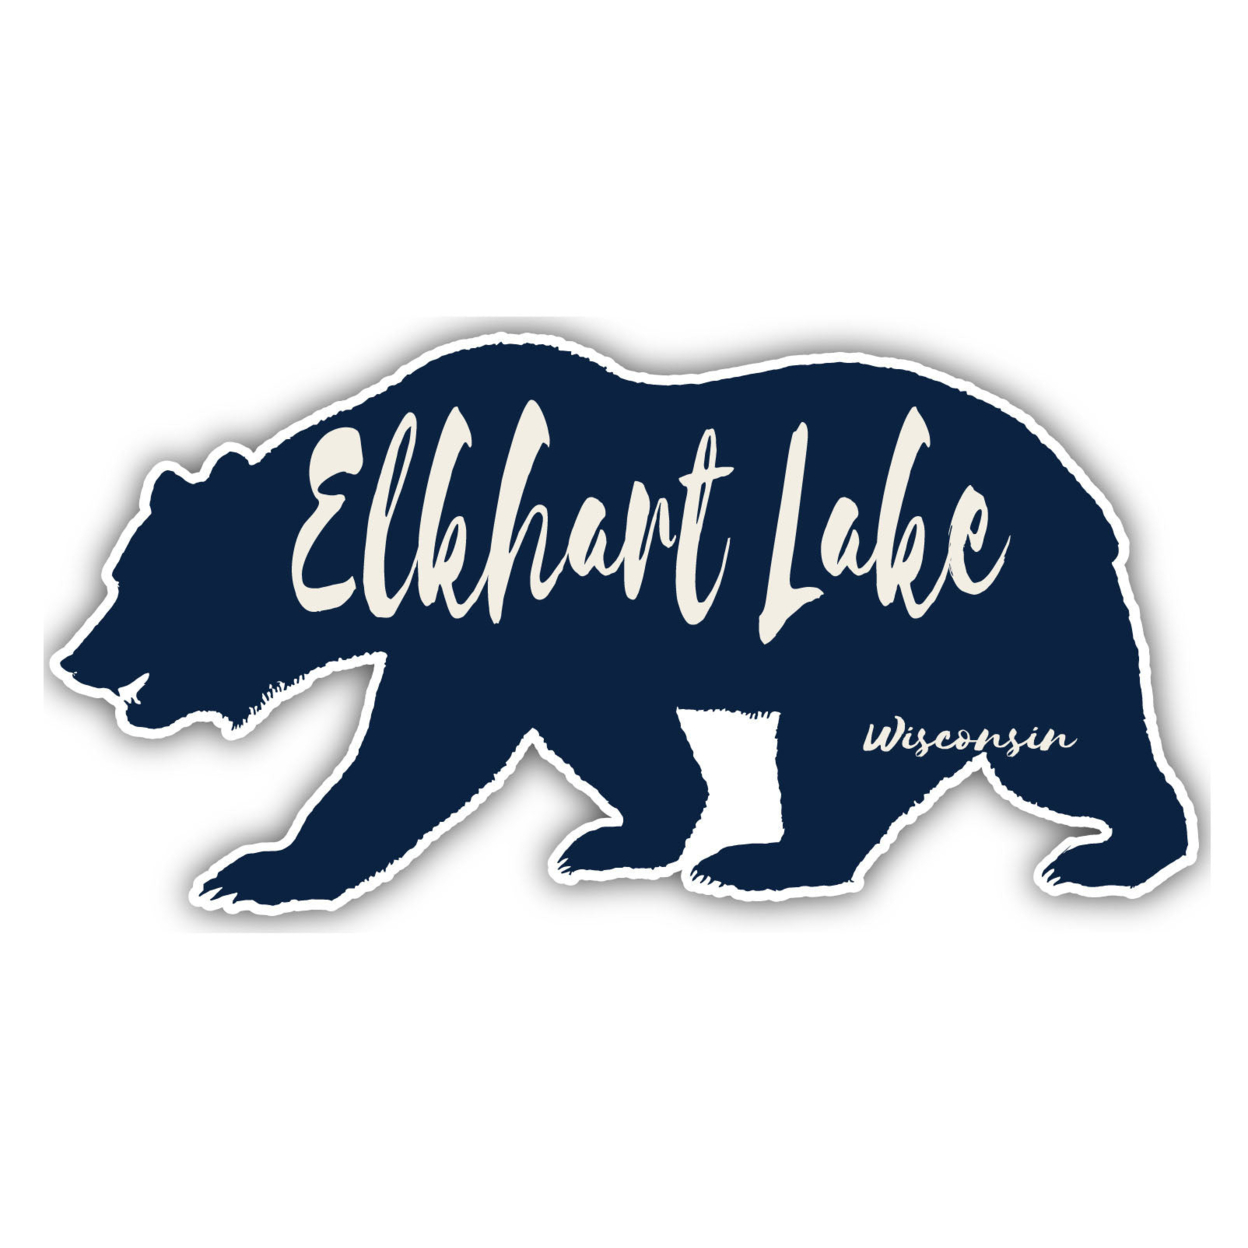 Elkhart Lake Wisconsin Souvenir Decorative Stickers (Choose Theme And Size) - 4-Pack, 8-Inch, Bear